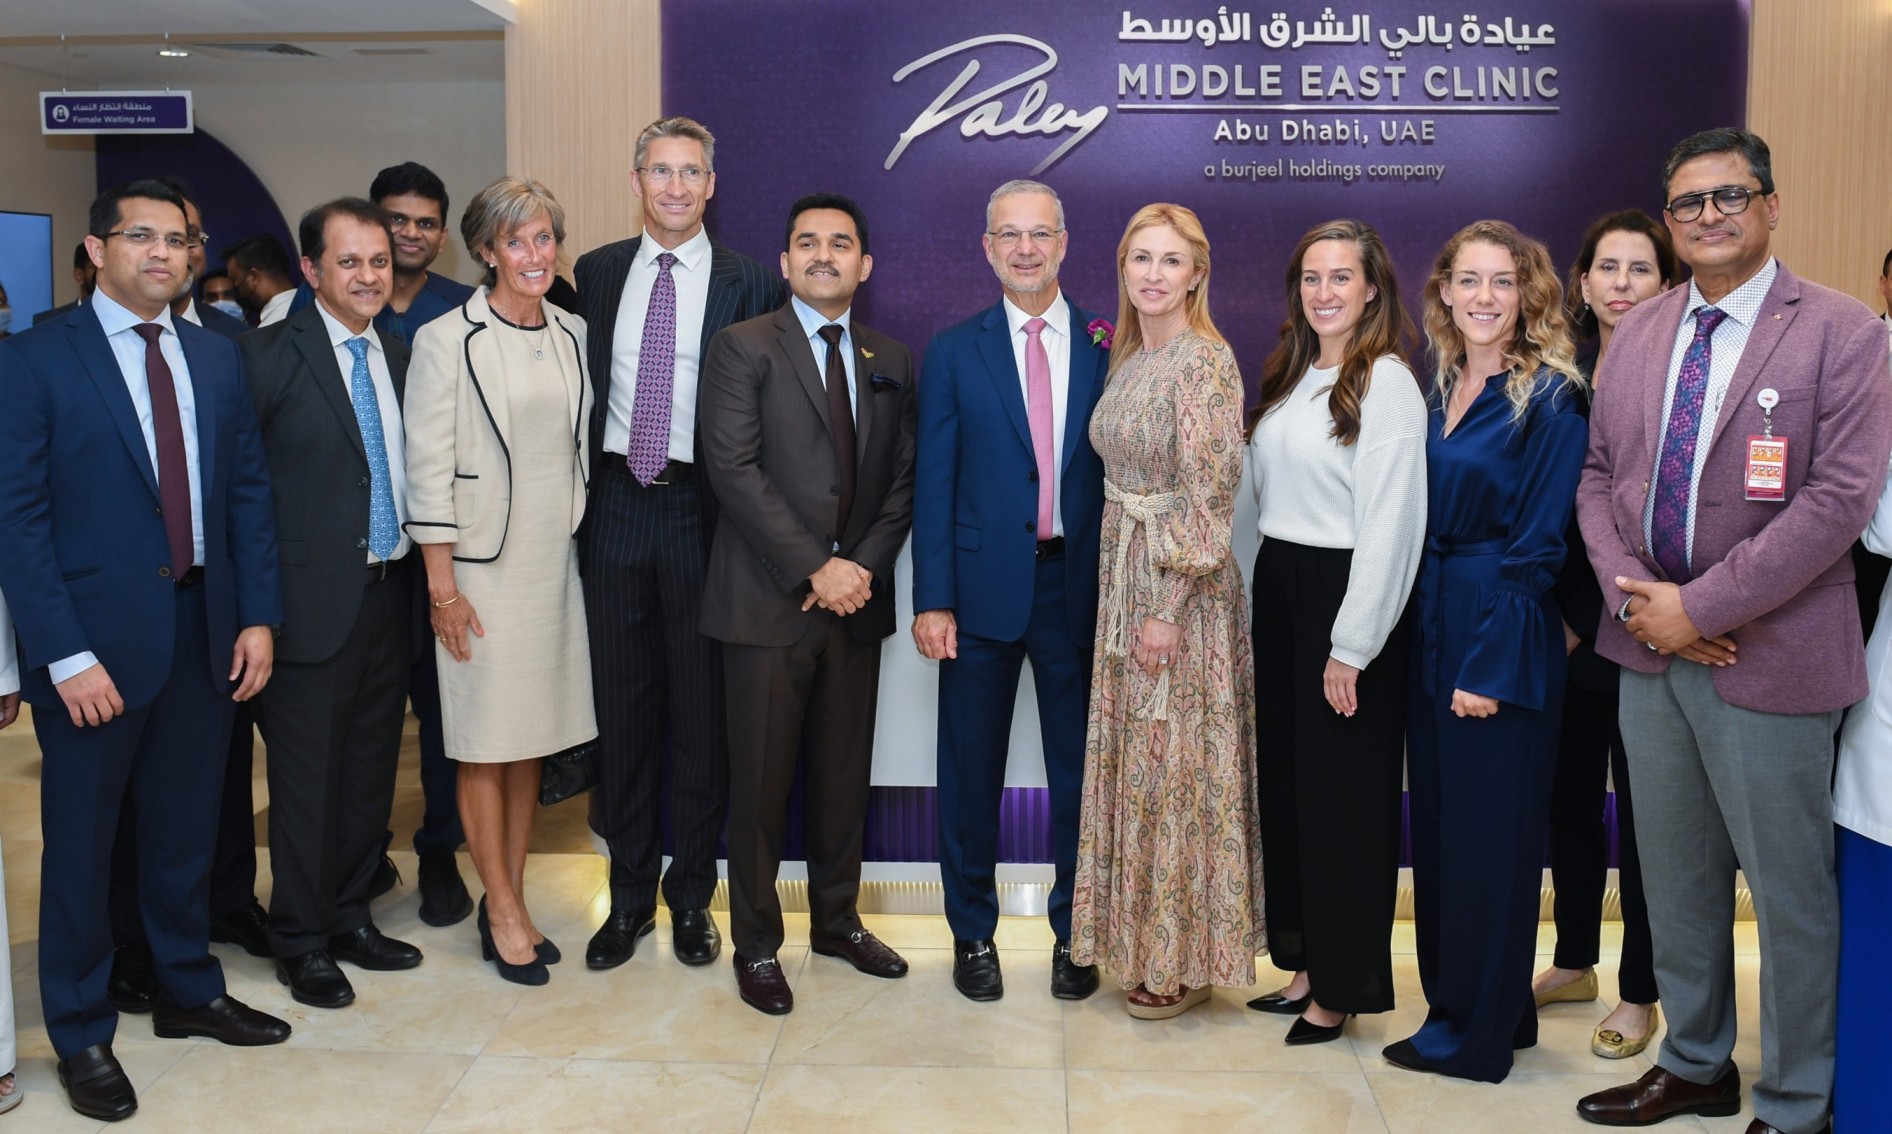 Renowned Limb Lengthening Expert Dr. Dror Paley Opens First Clinic in Middle East at Burjeel Medical City